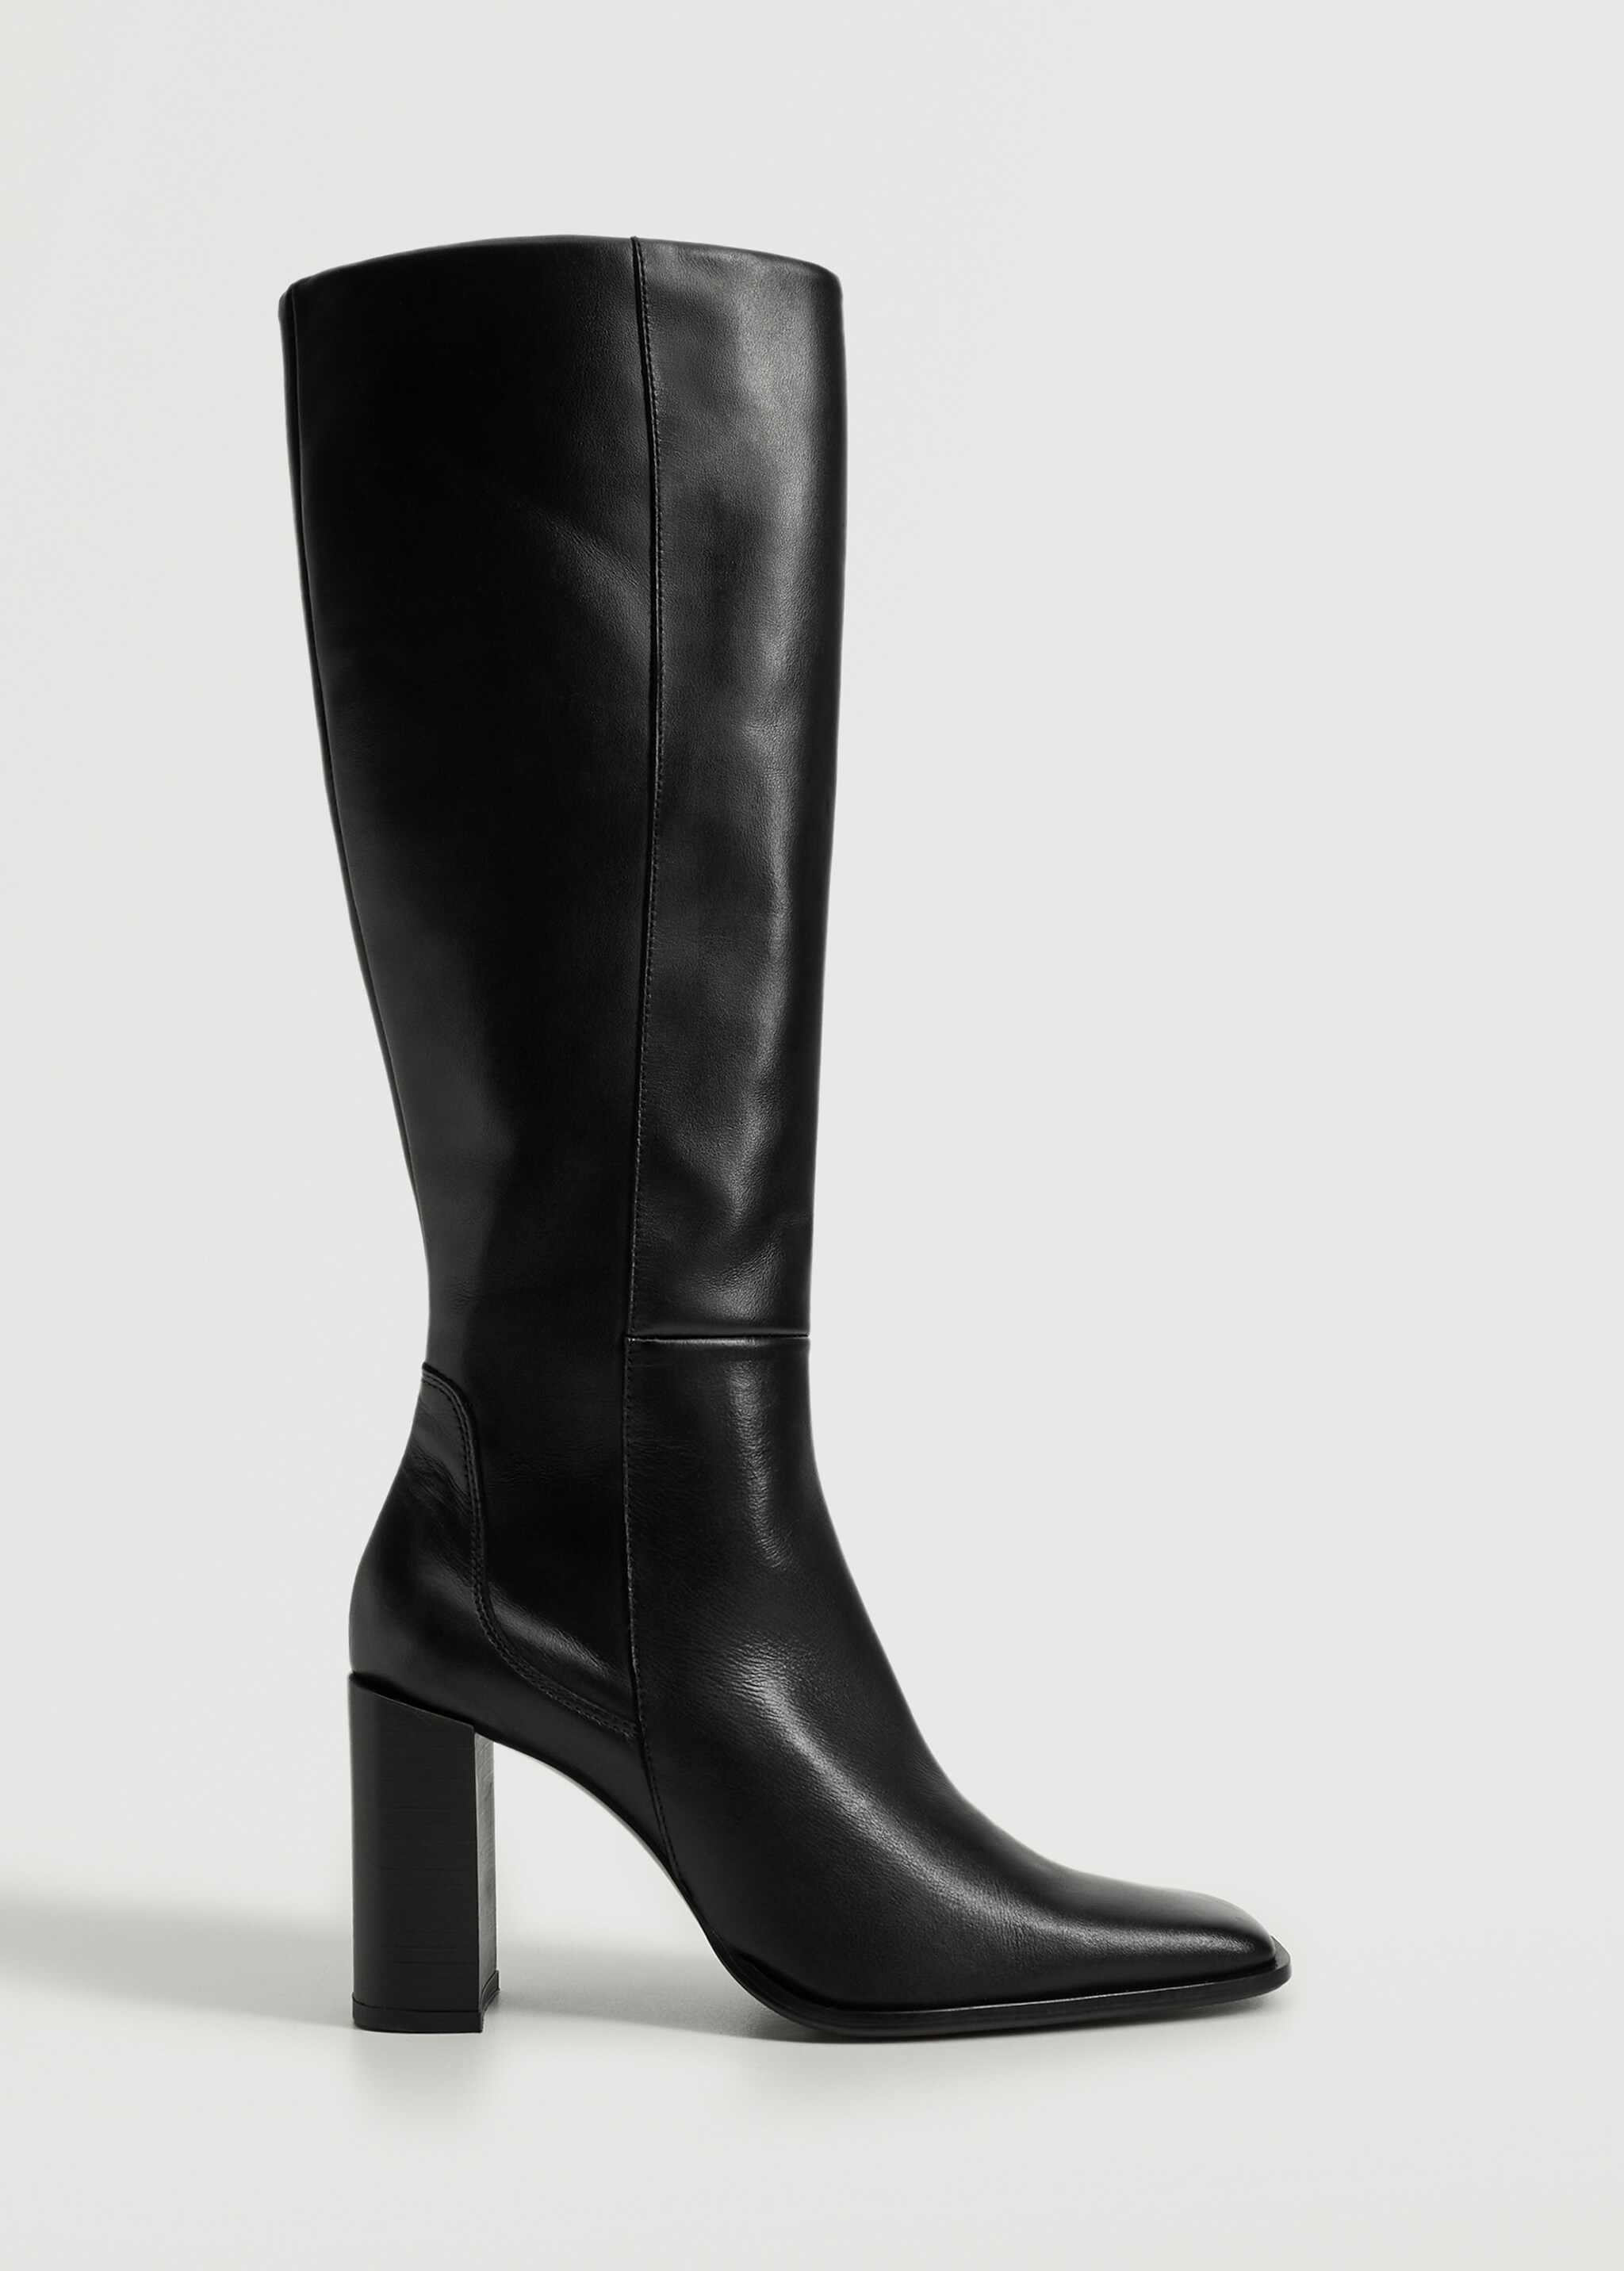 High heel leather boot - Article without model